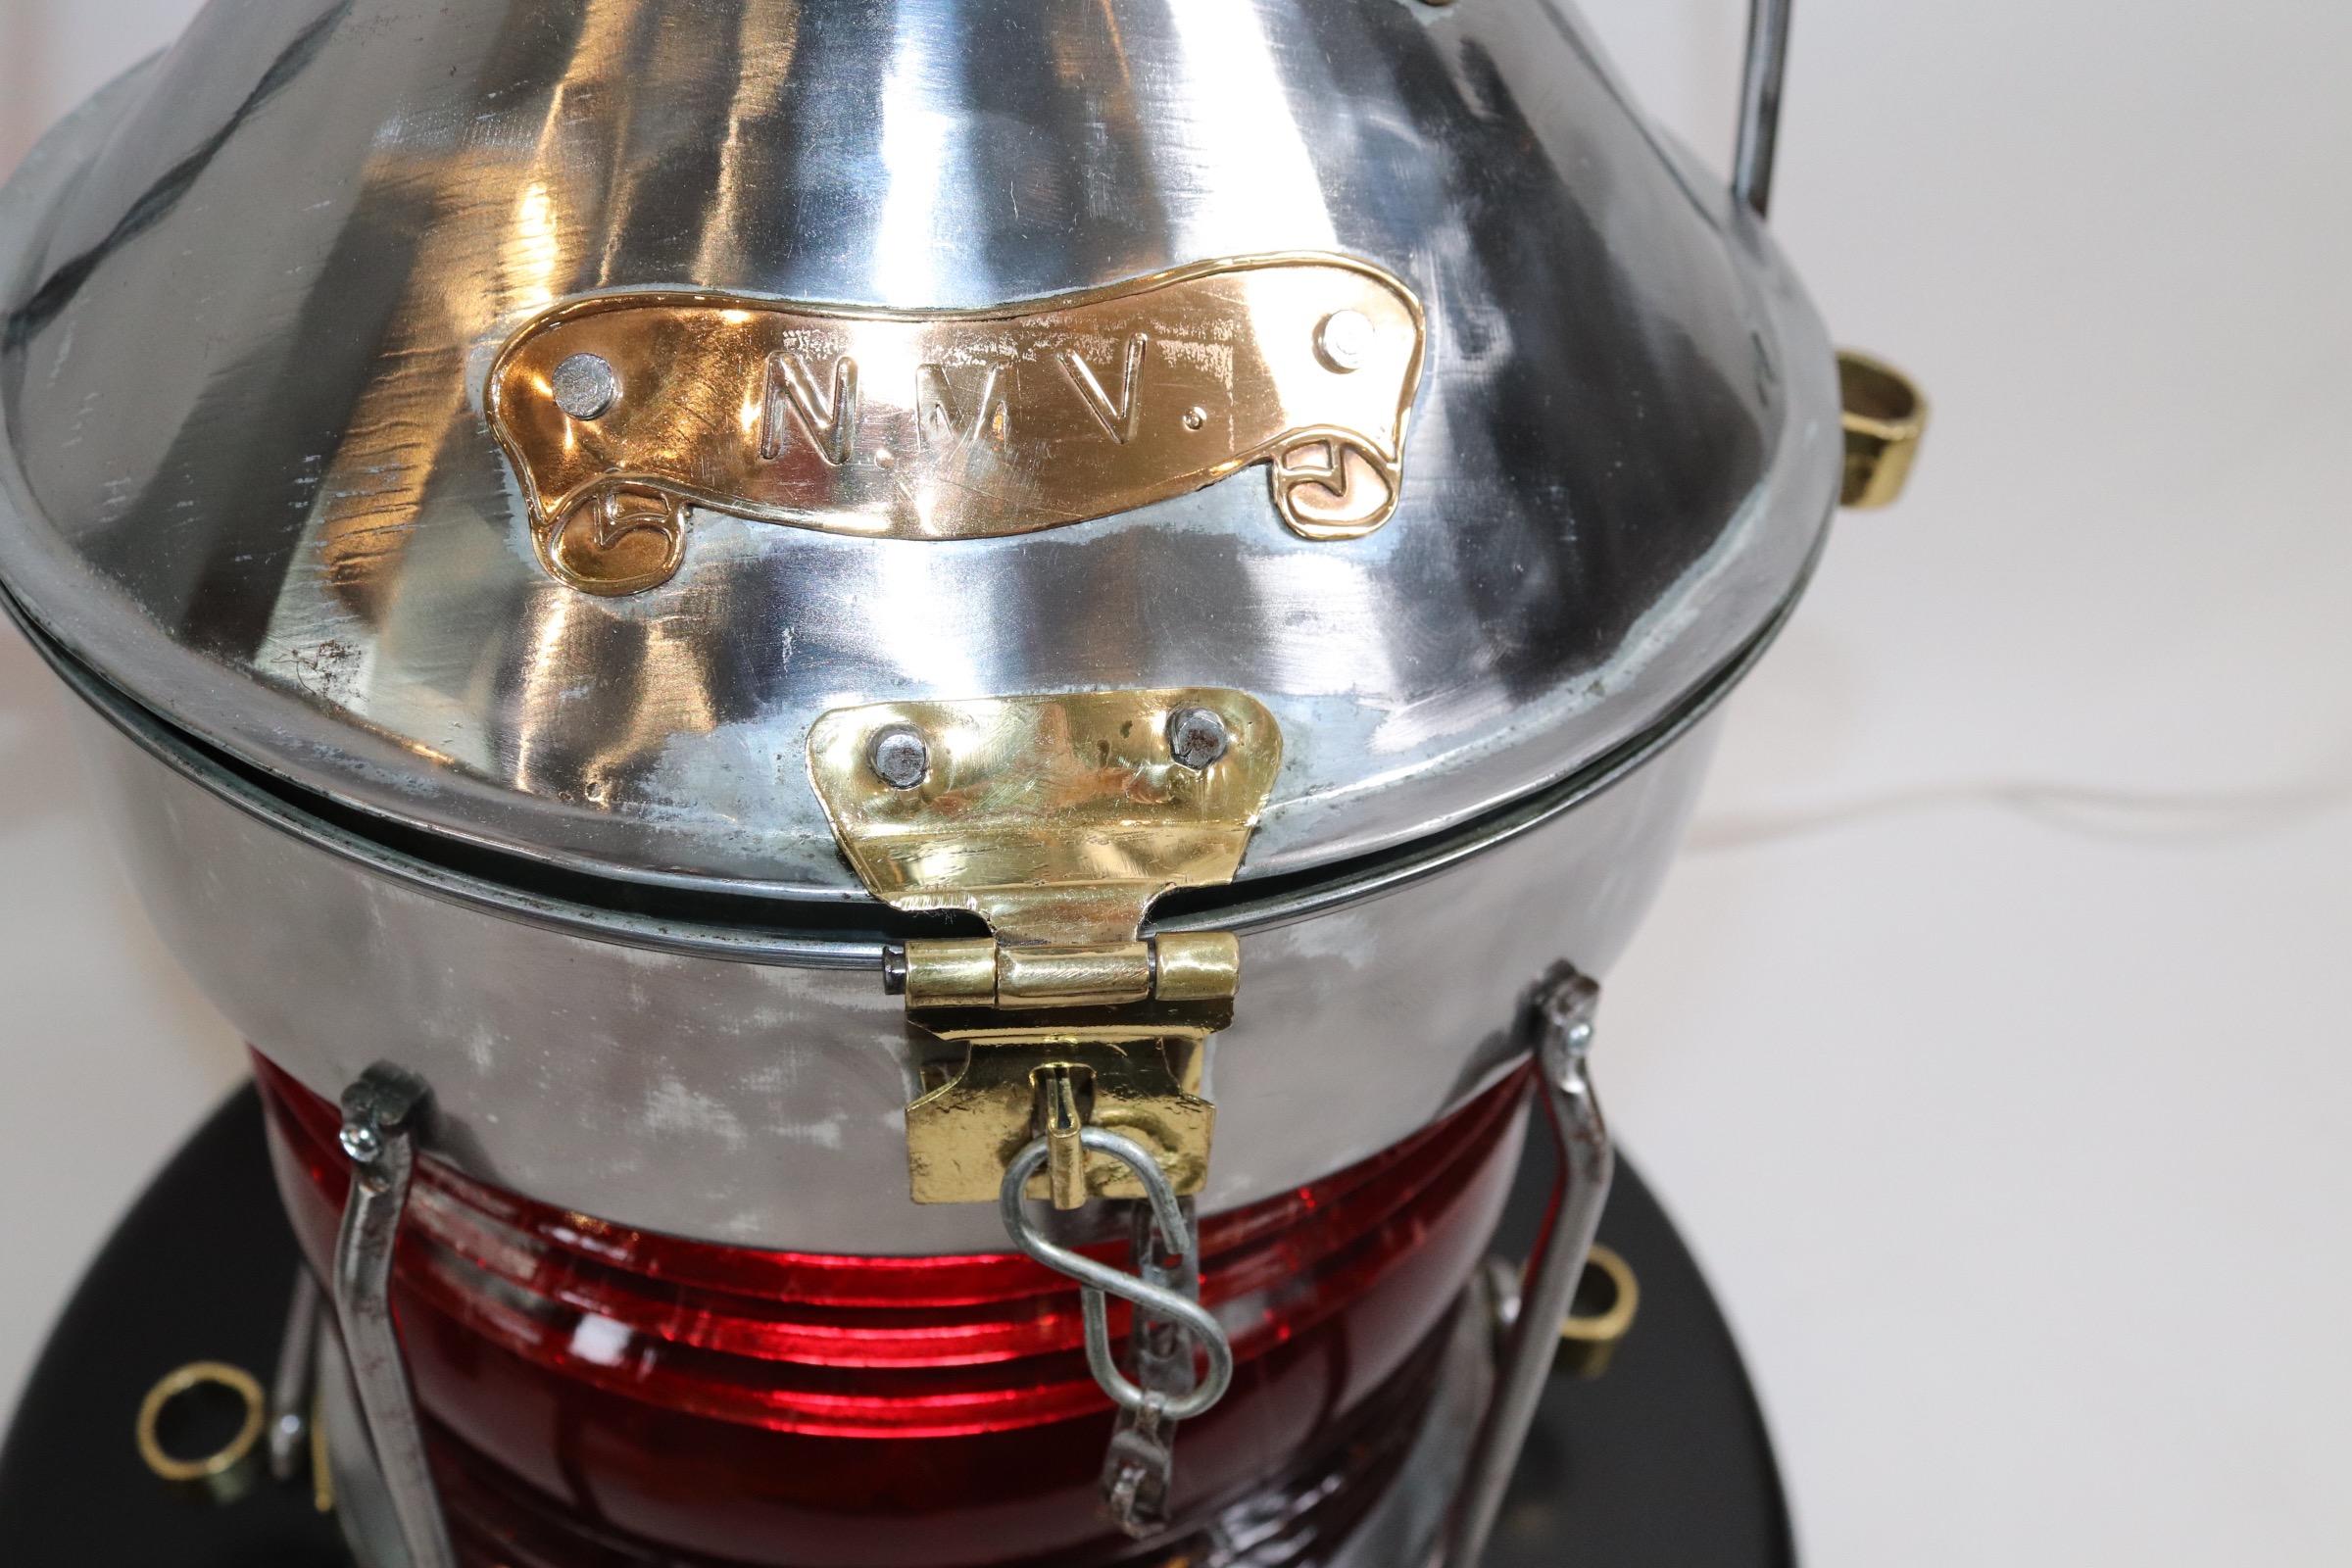 Polished steel ships not under command lantern with rich ruby red fresnel lens. Lantern is mounted to a thick wood base with routed edge and dark finish. Lantern has been electrified for home display. Weight is 24 pounds.